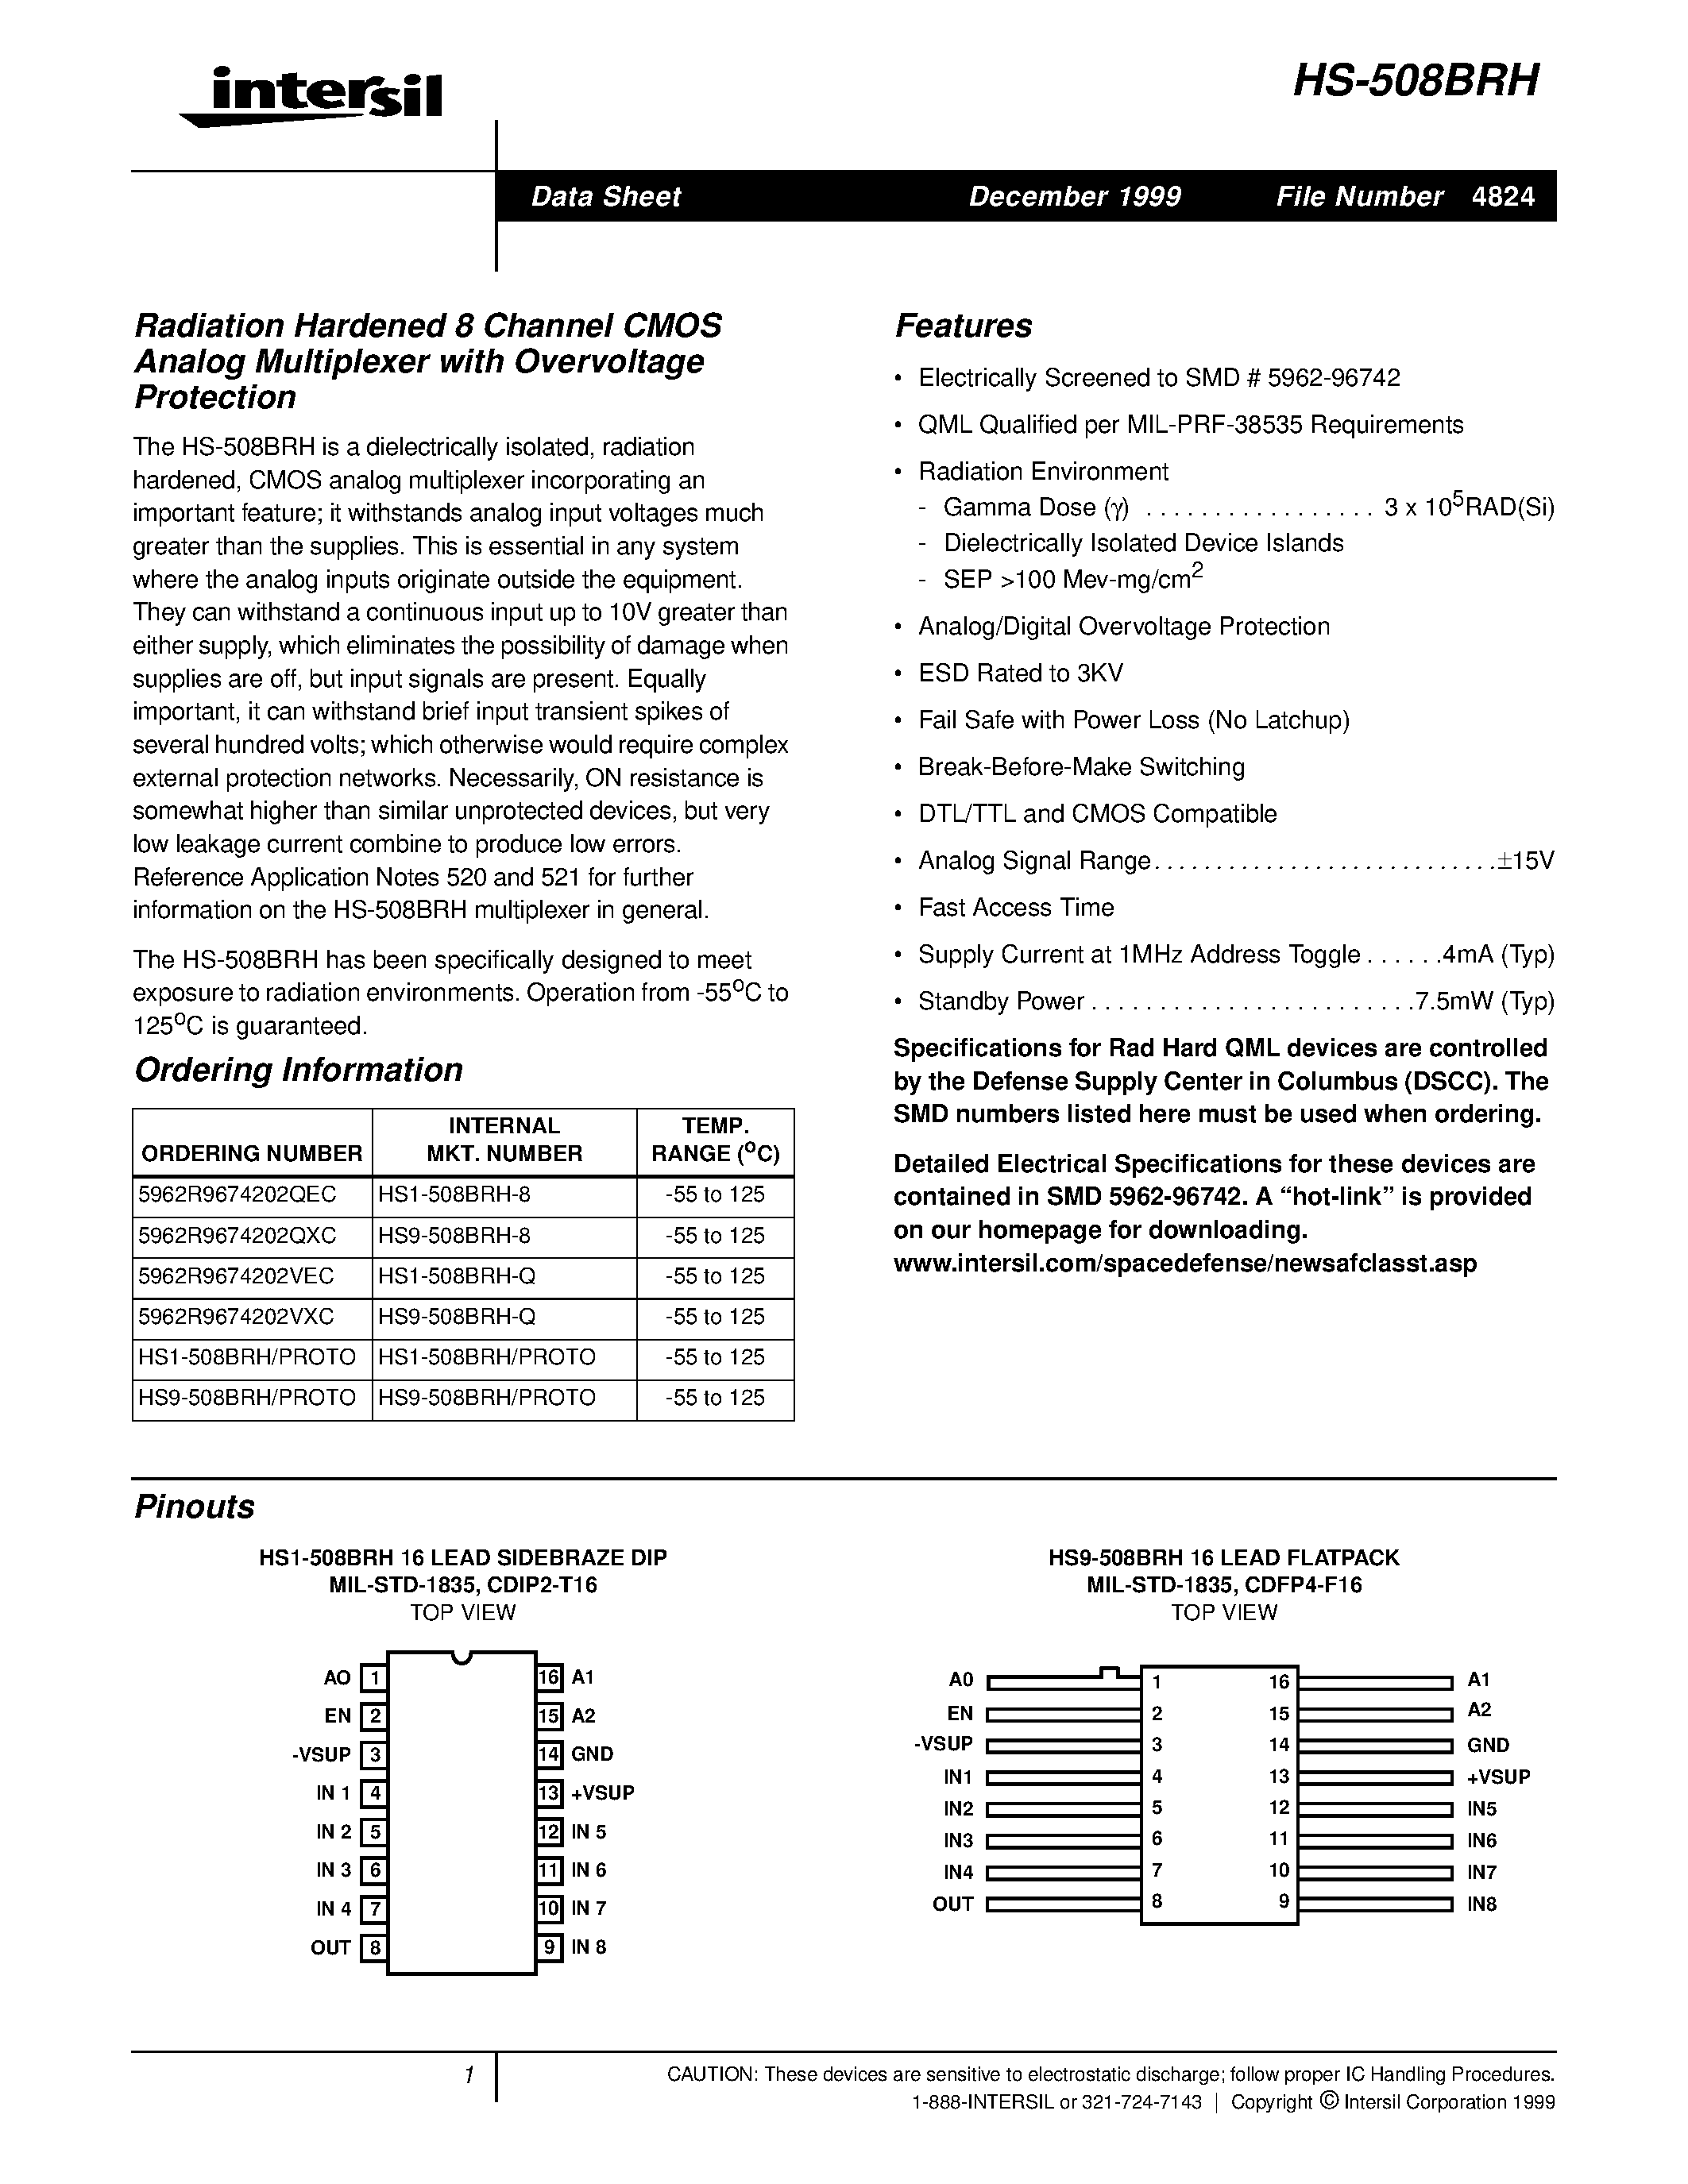 Datasheet HS9-508BRH-8 - Radiation Hardened 8 Channel CMOS Analog Multiplexer with Overvoltage Protection page 1